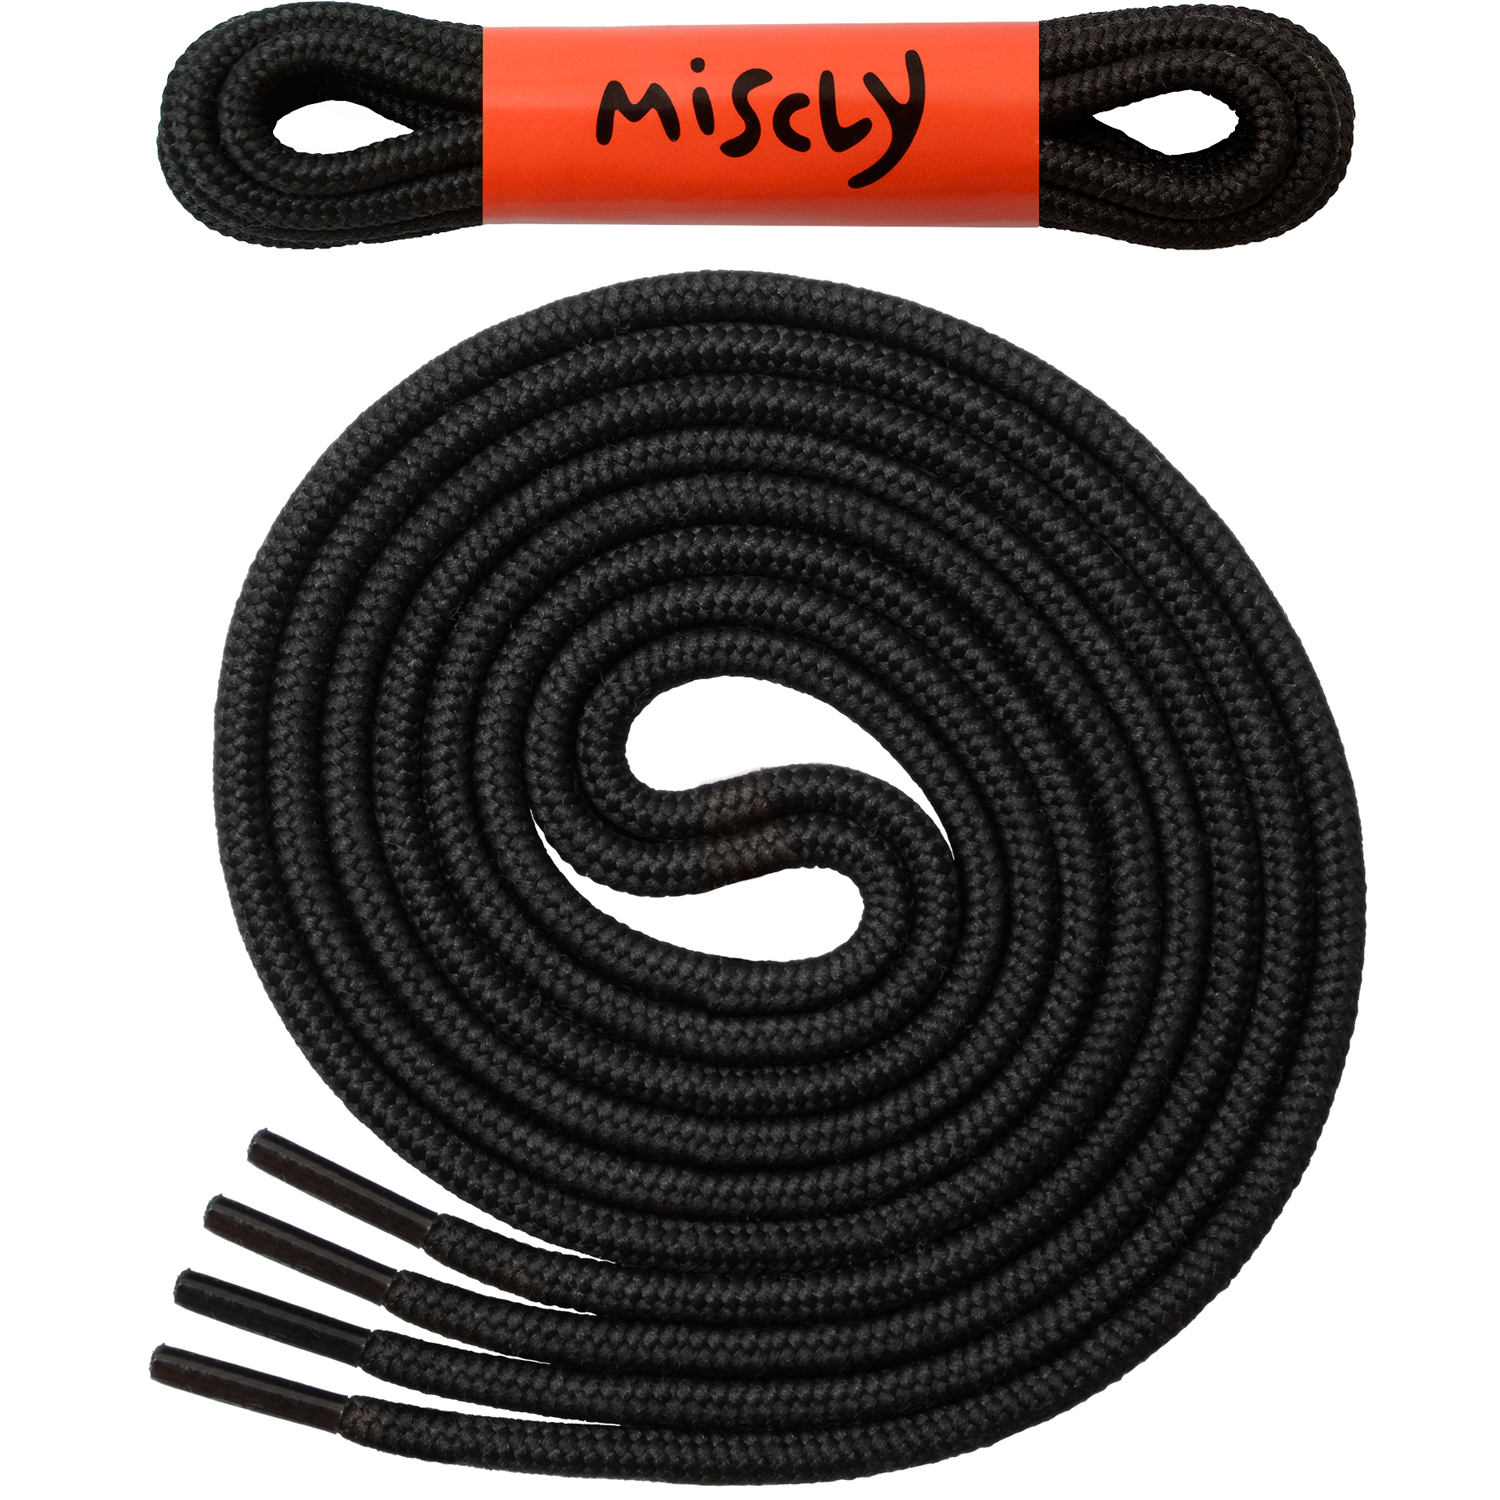 Round Athletic Shoelaces – MISCLY